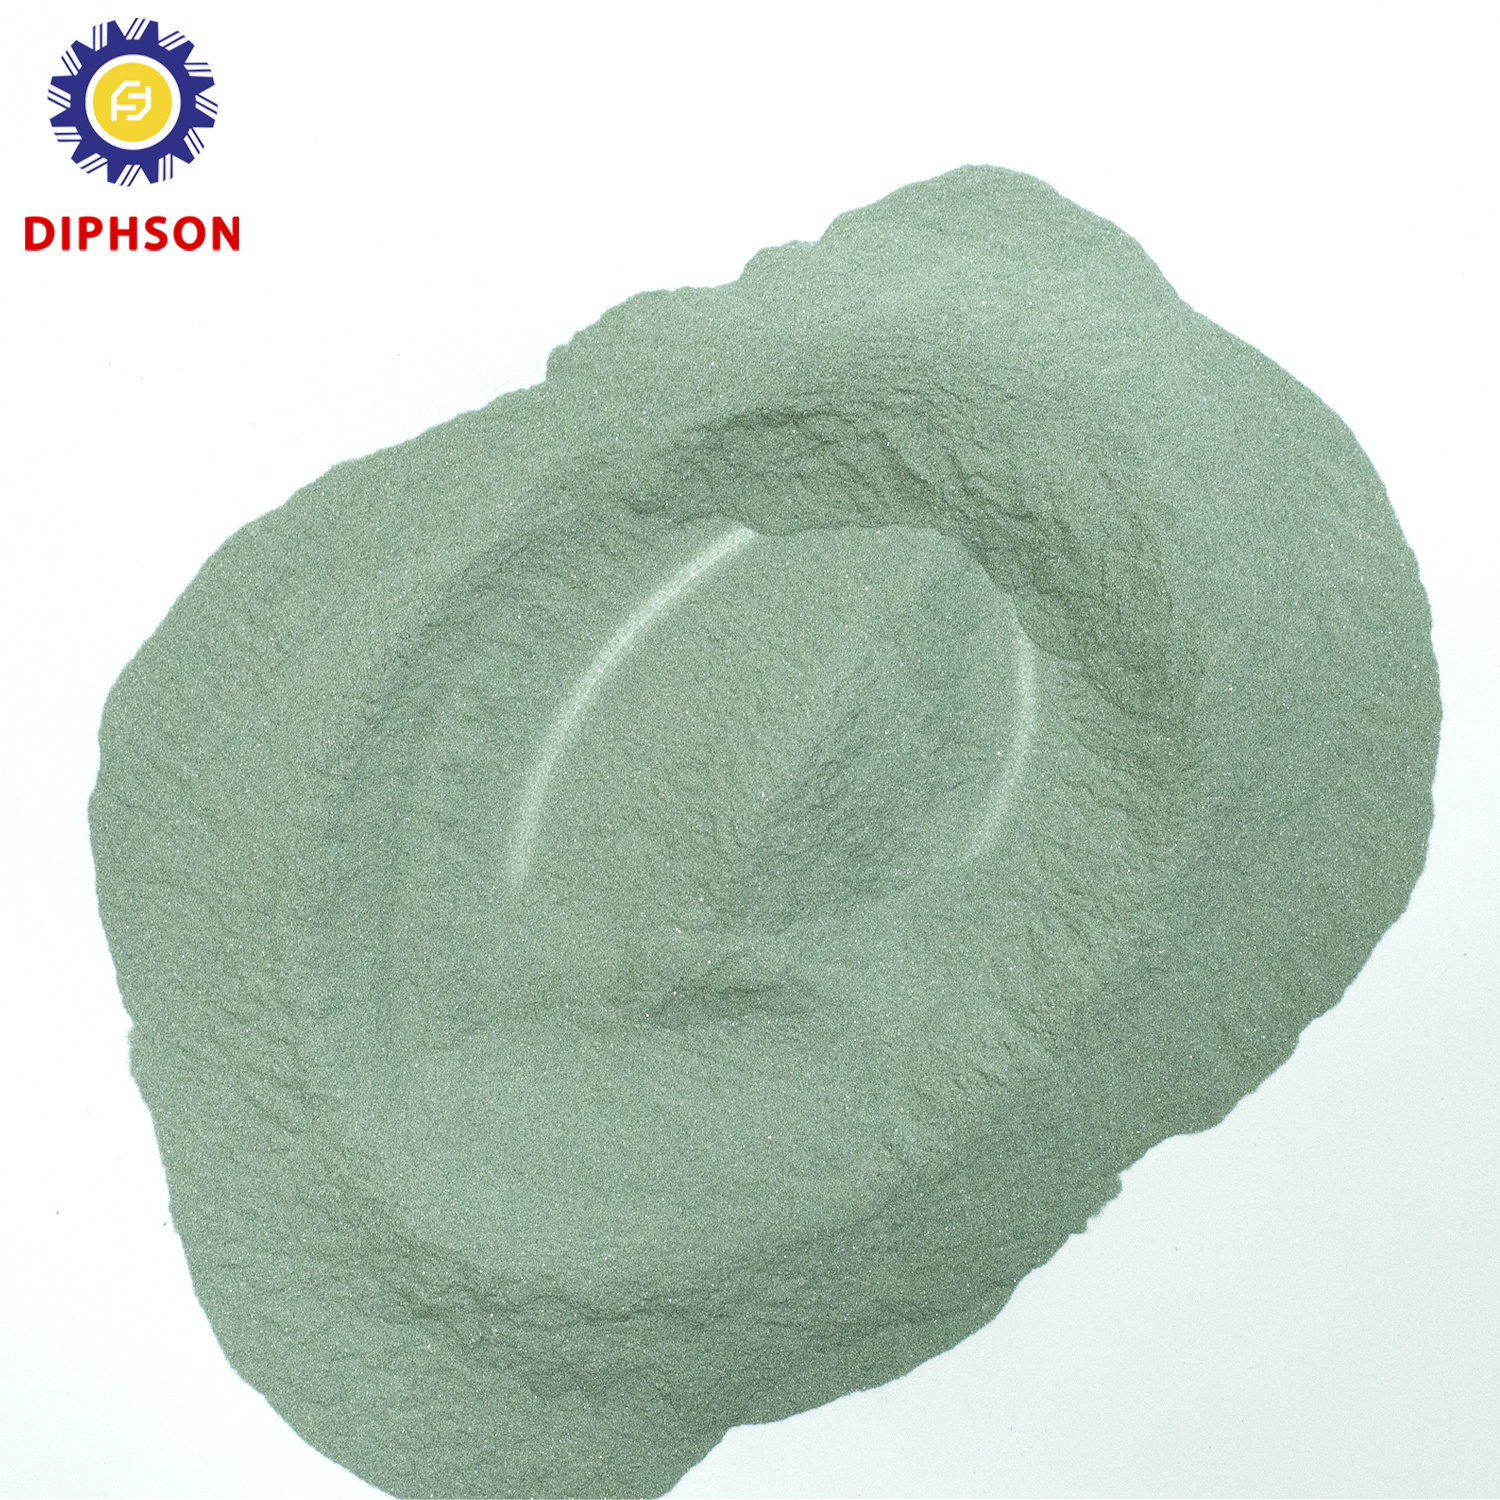 The uses and characteristics of green silicon carbide powder.